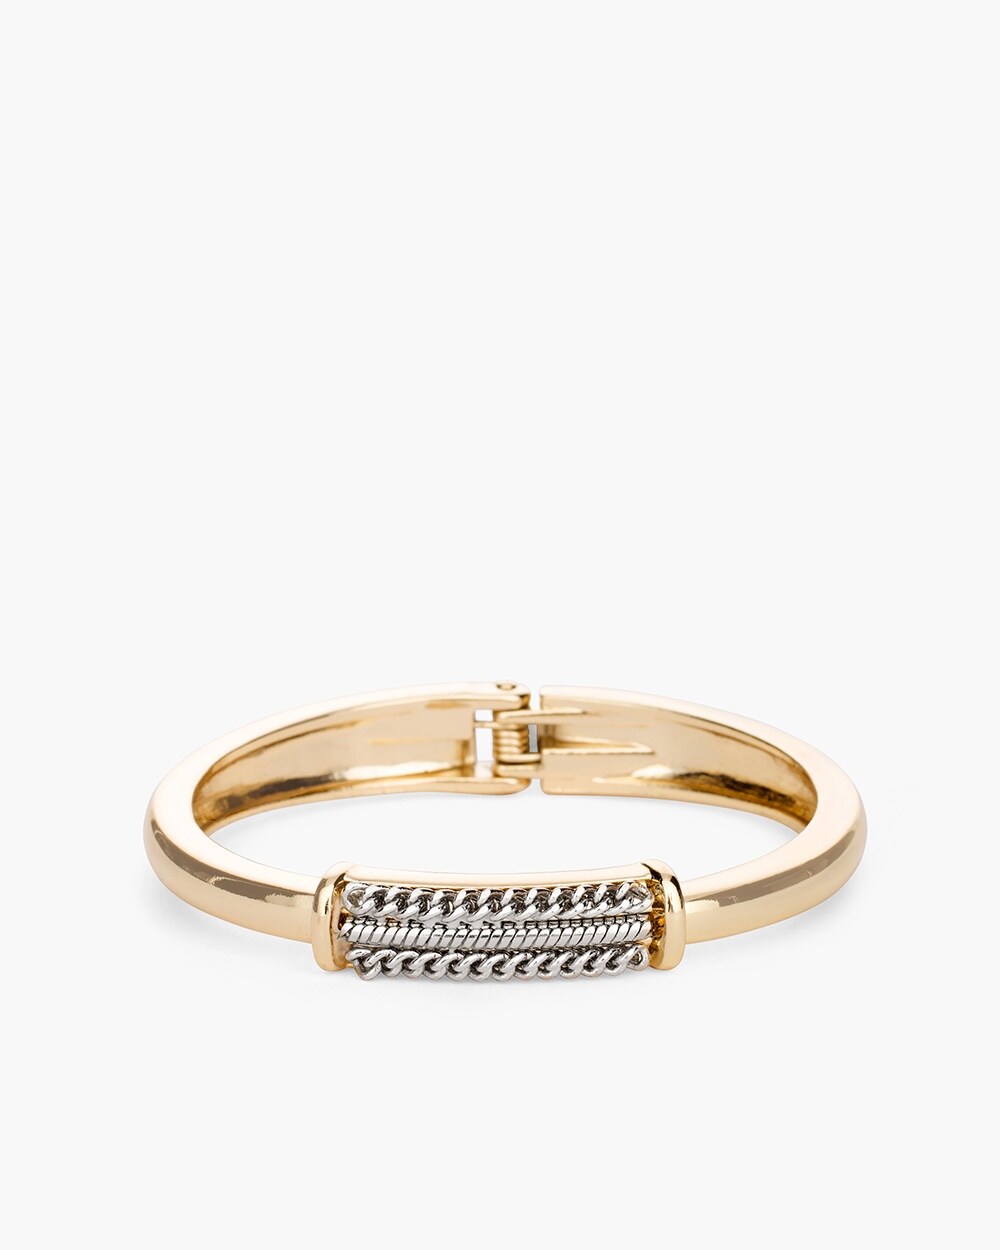 Gold-Tone Magnetic Bracelet With Silver-Tone Hinge